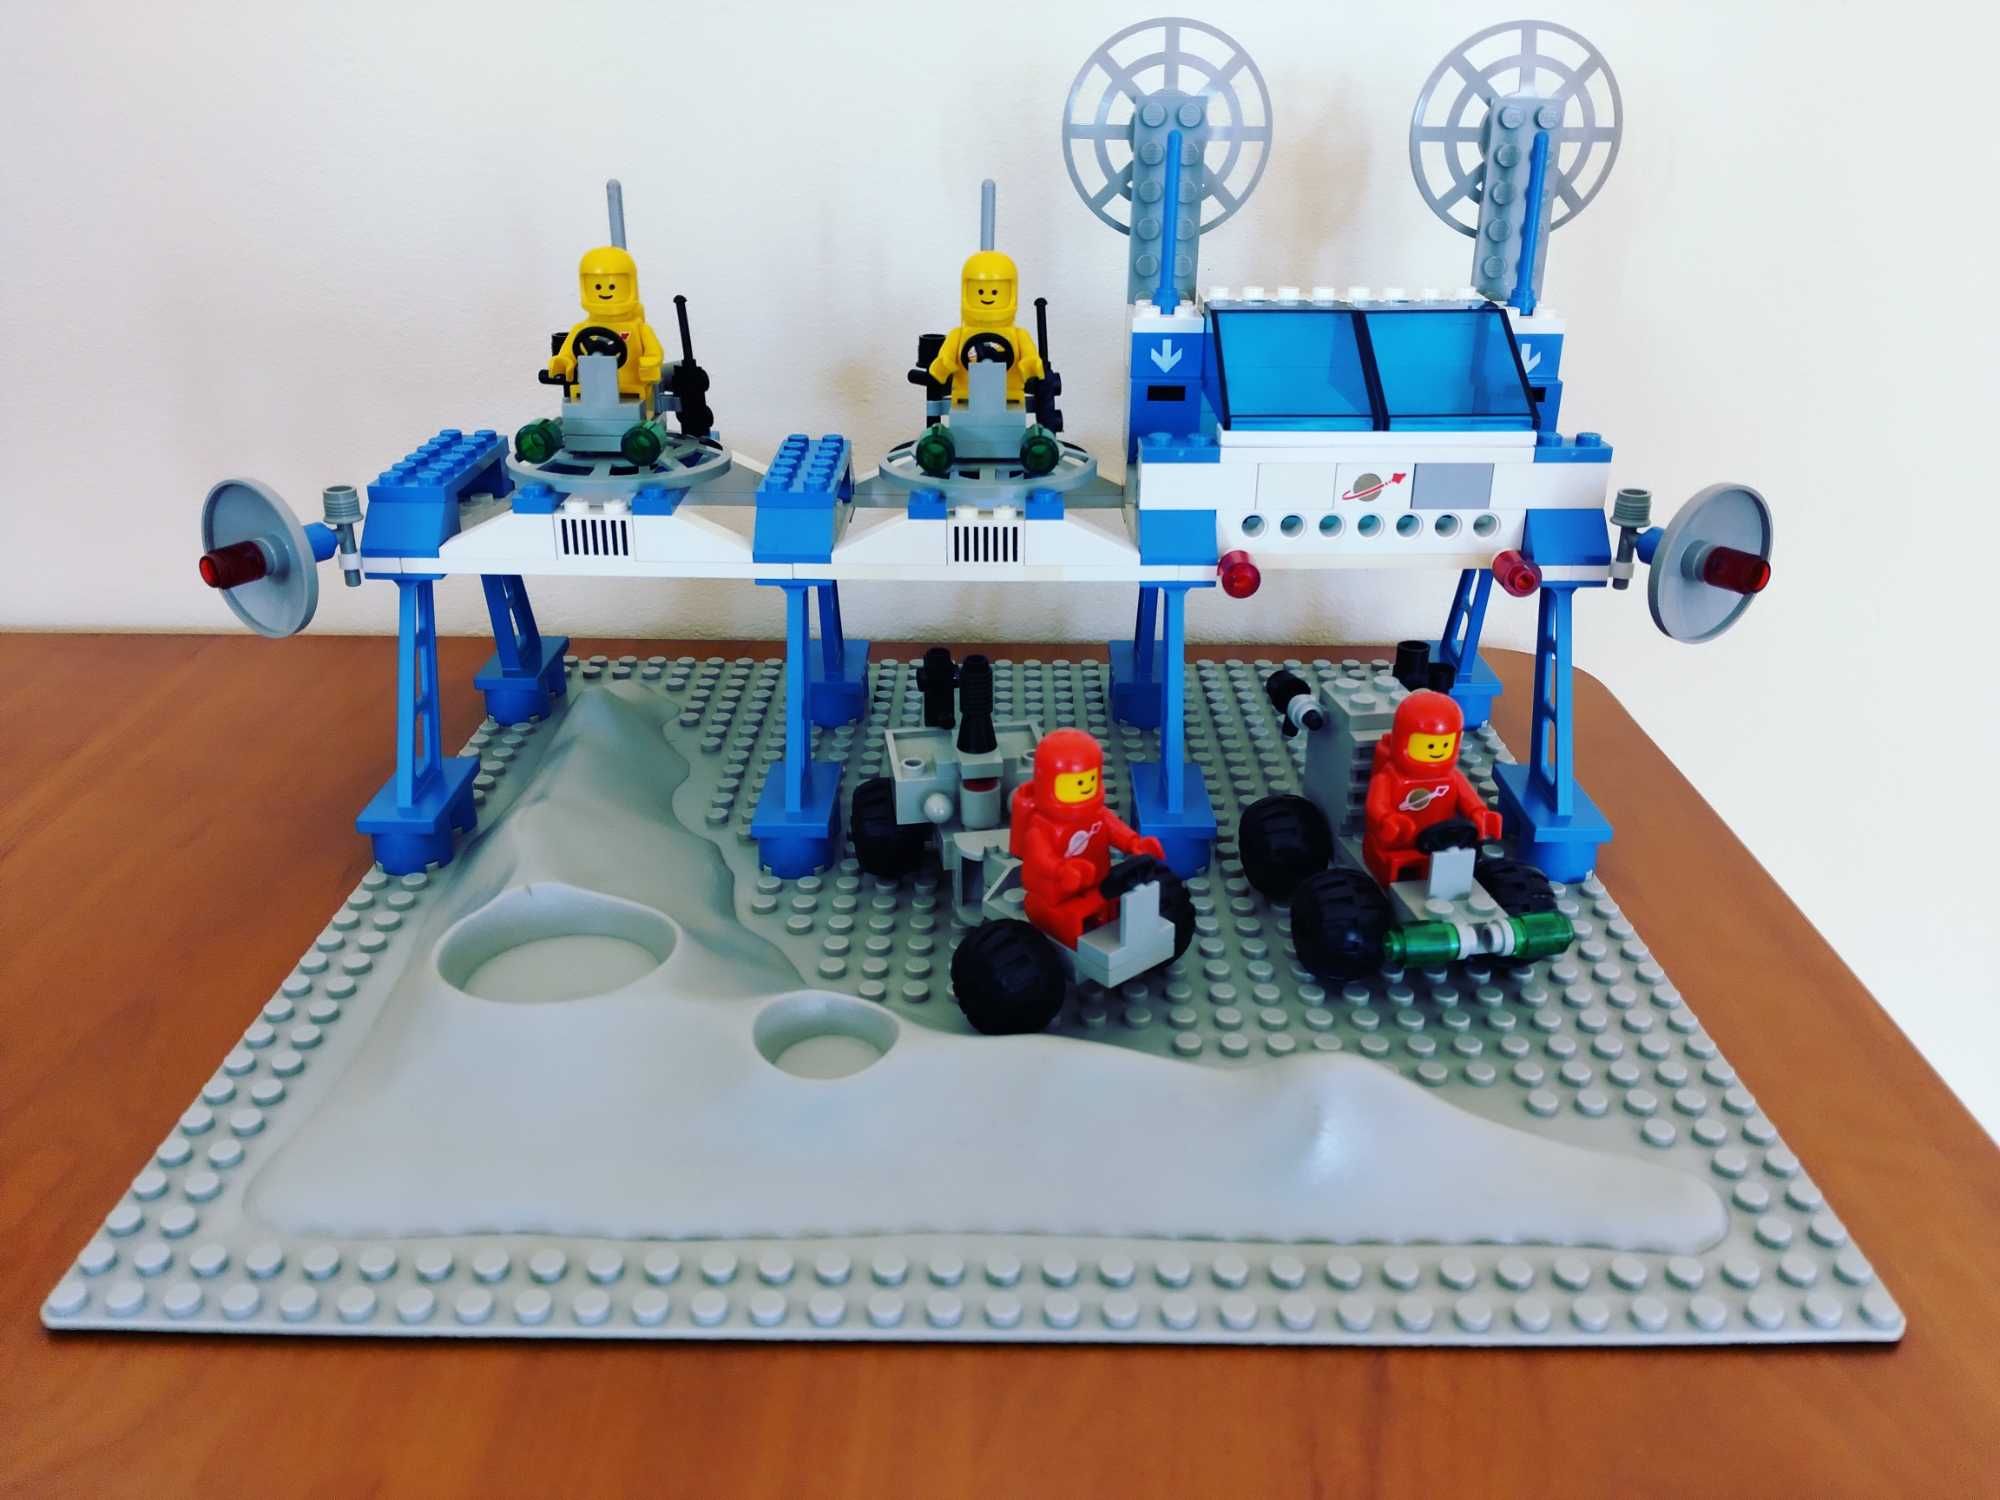 Lego Classic Space 6930 Space Supply Station